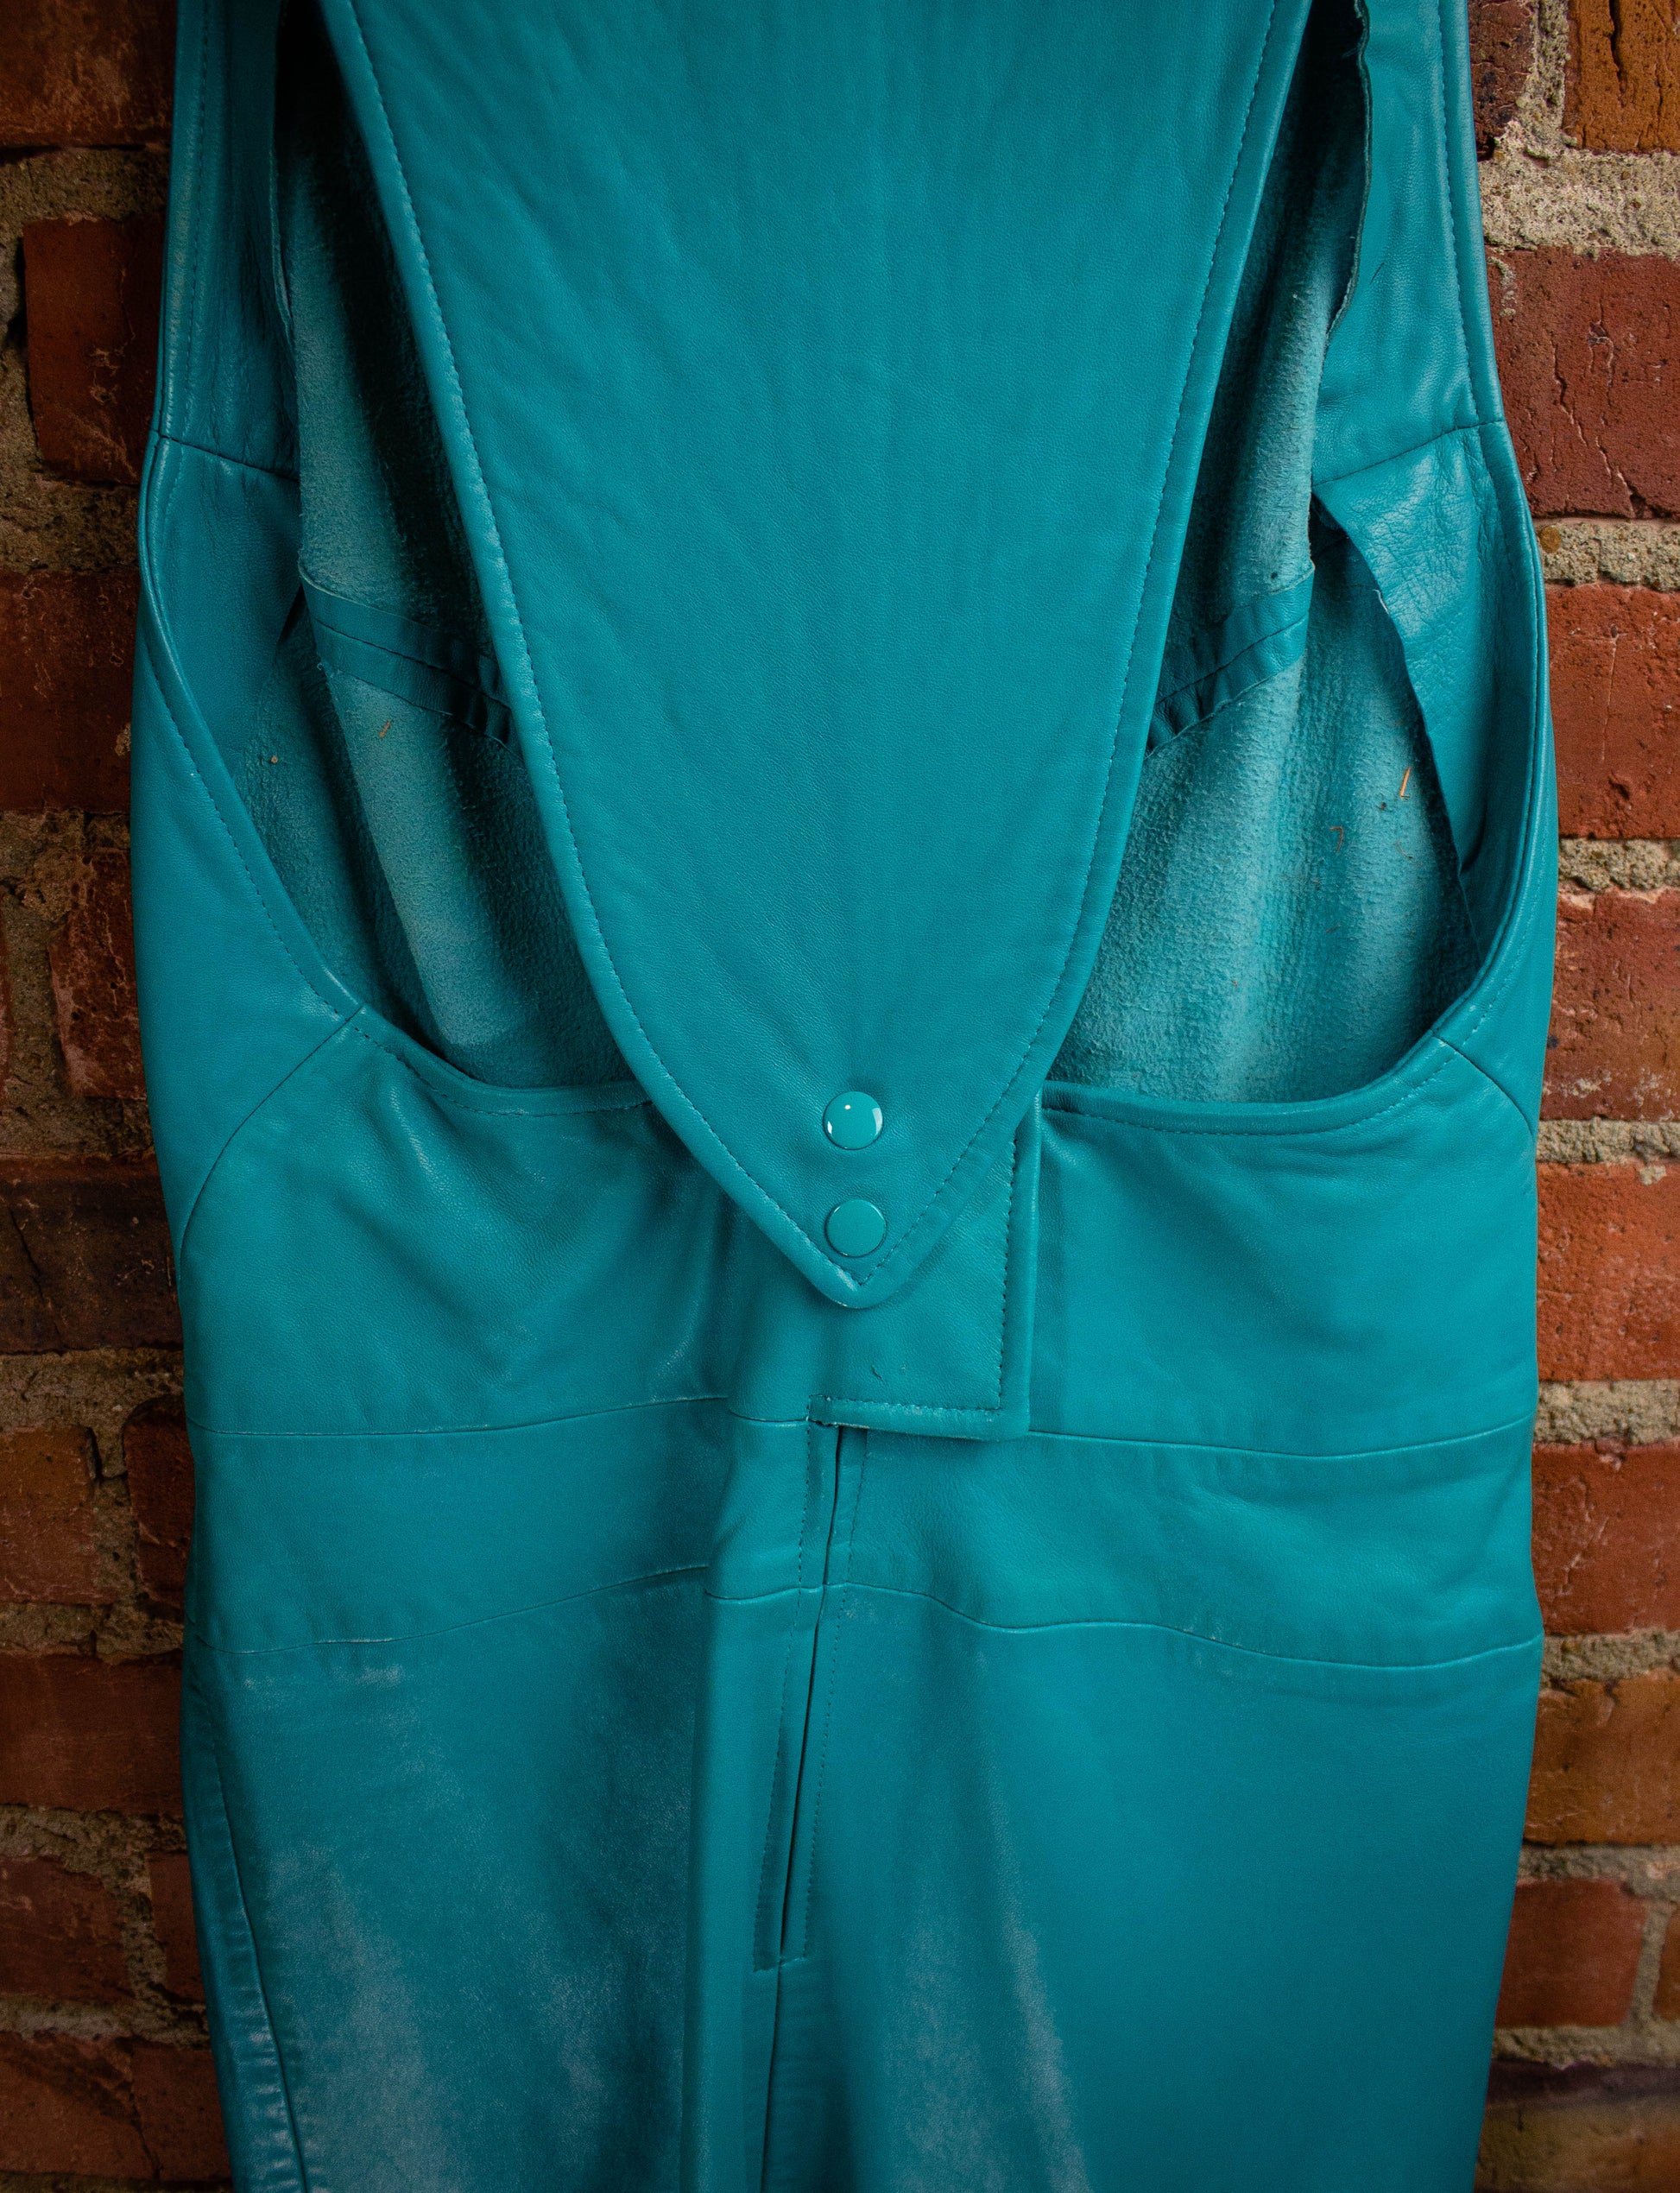 Vintage Michael Hoban For North Beach Turquoise Sleeveless Leather Dress S